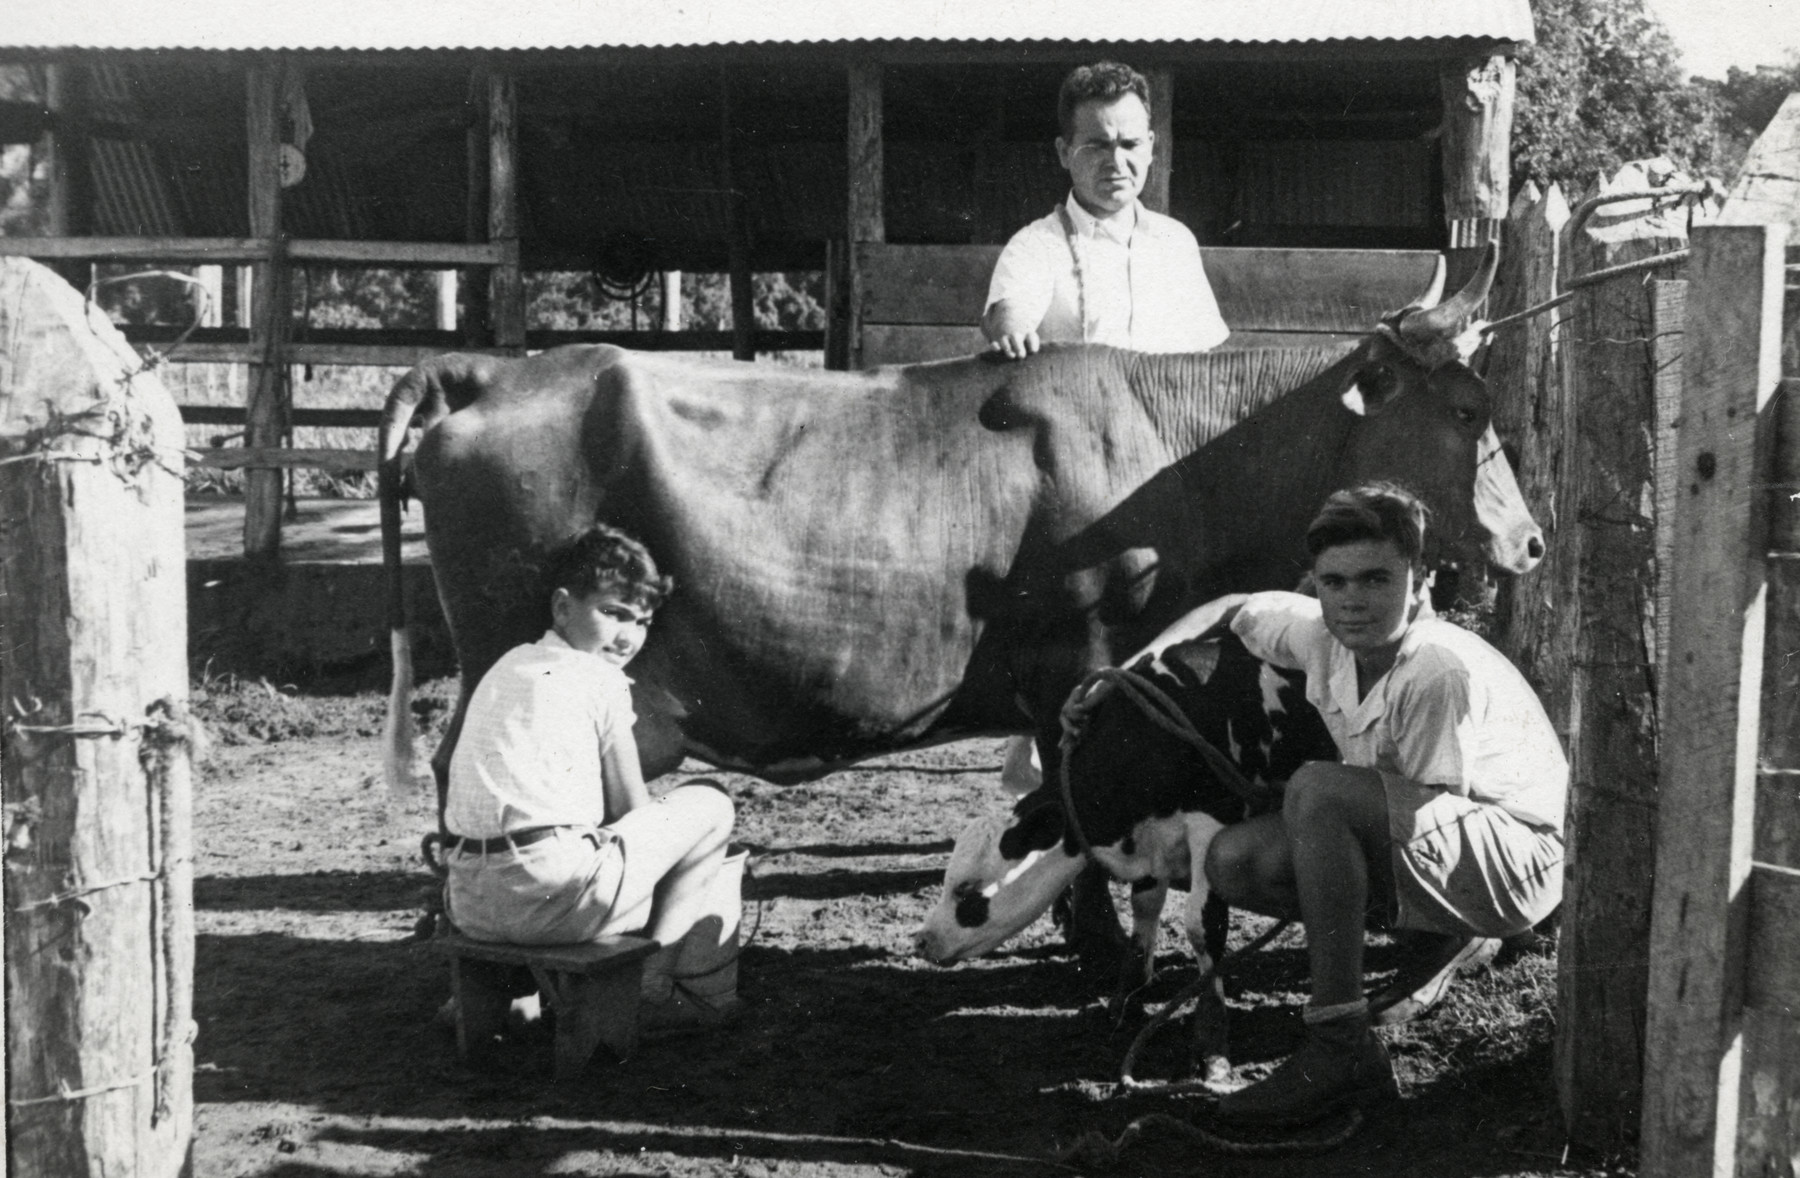 The Salomon family milks cows in the Sosua refugee colony.  

Aron Joseph Salomon is standing in the center.  Marcel is seated on the left and Alex is on the right.